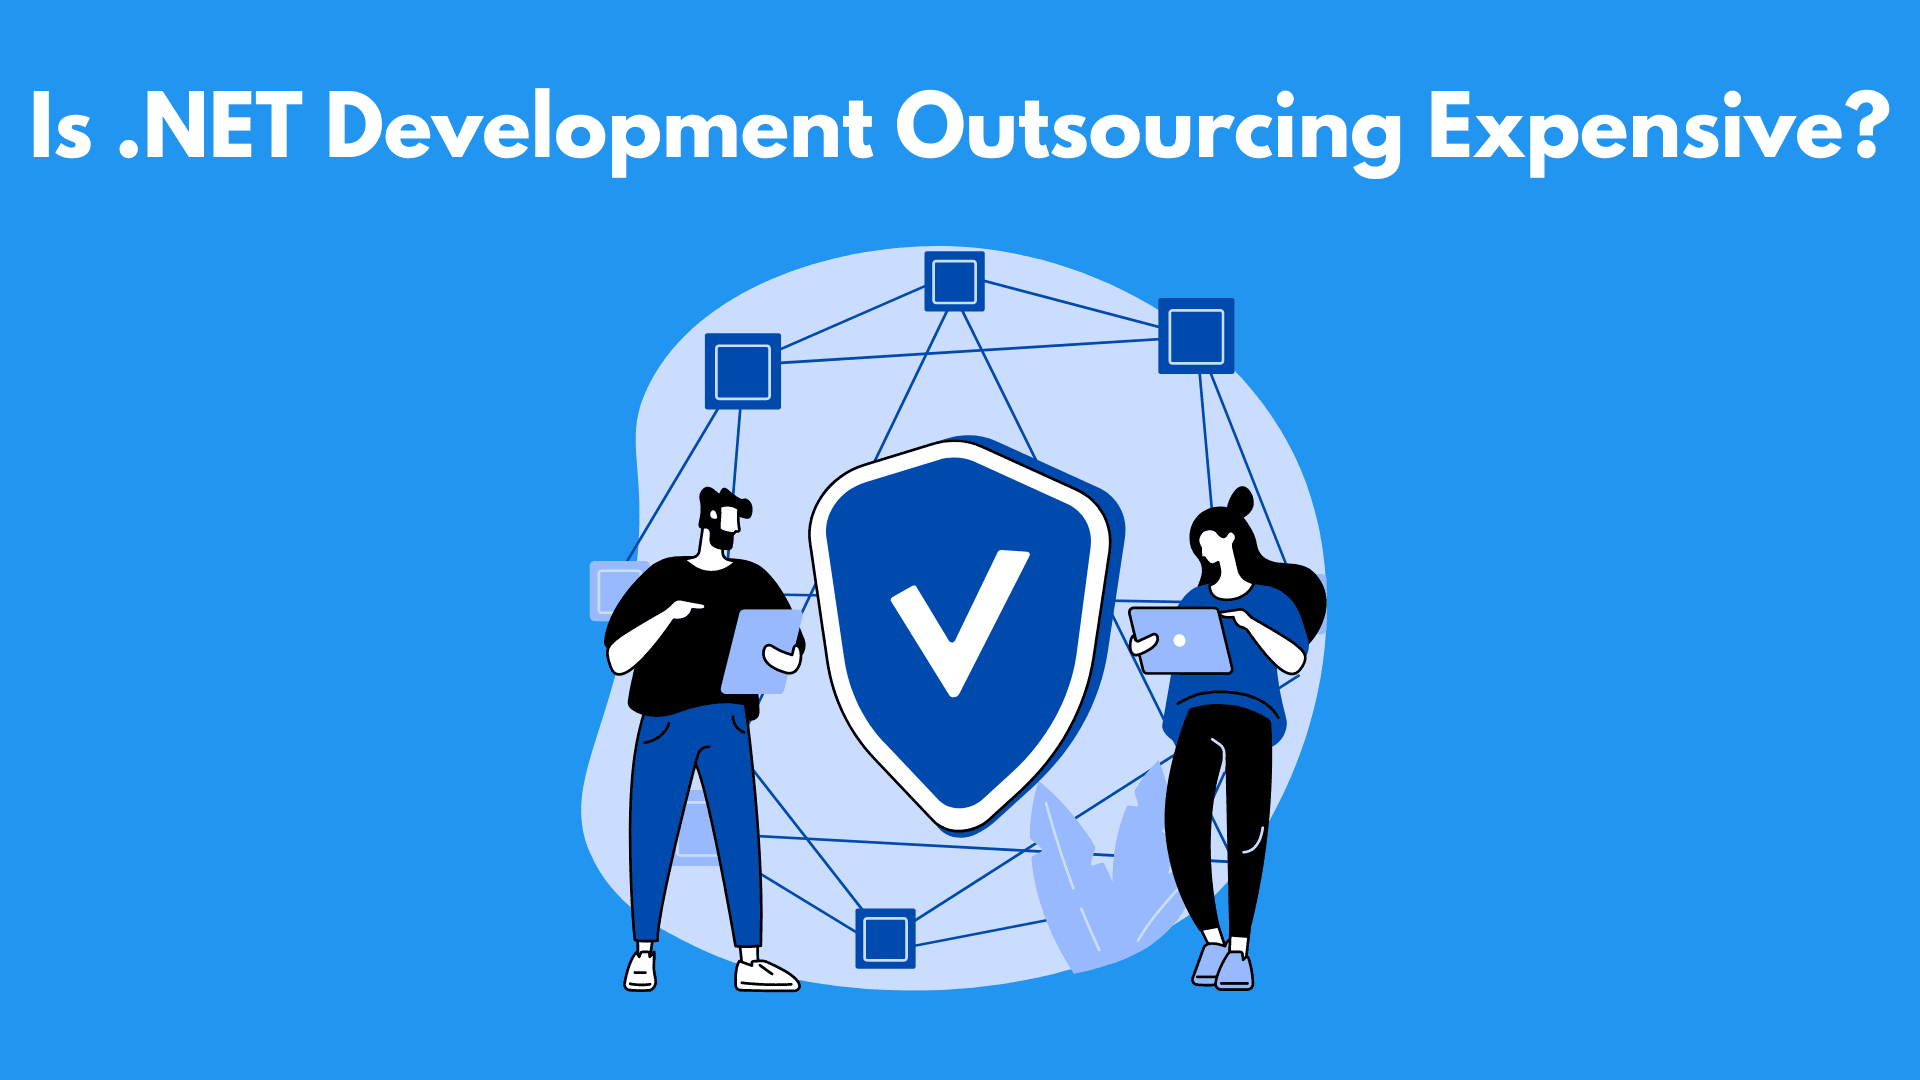 Is .NET Development Outsourcing Expensive?